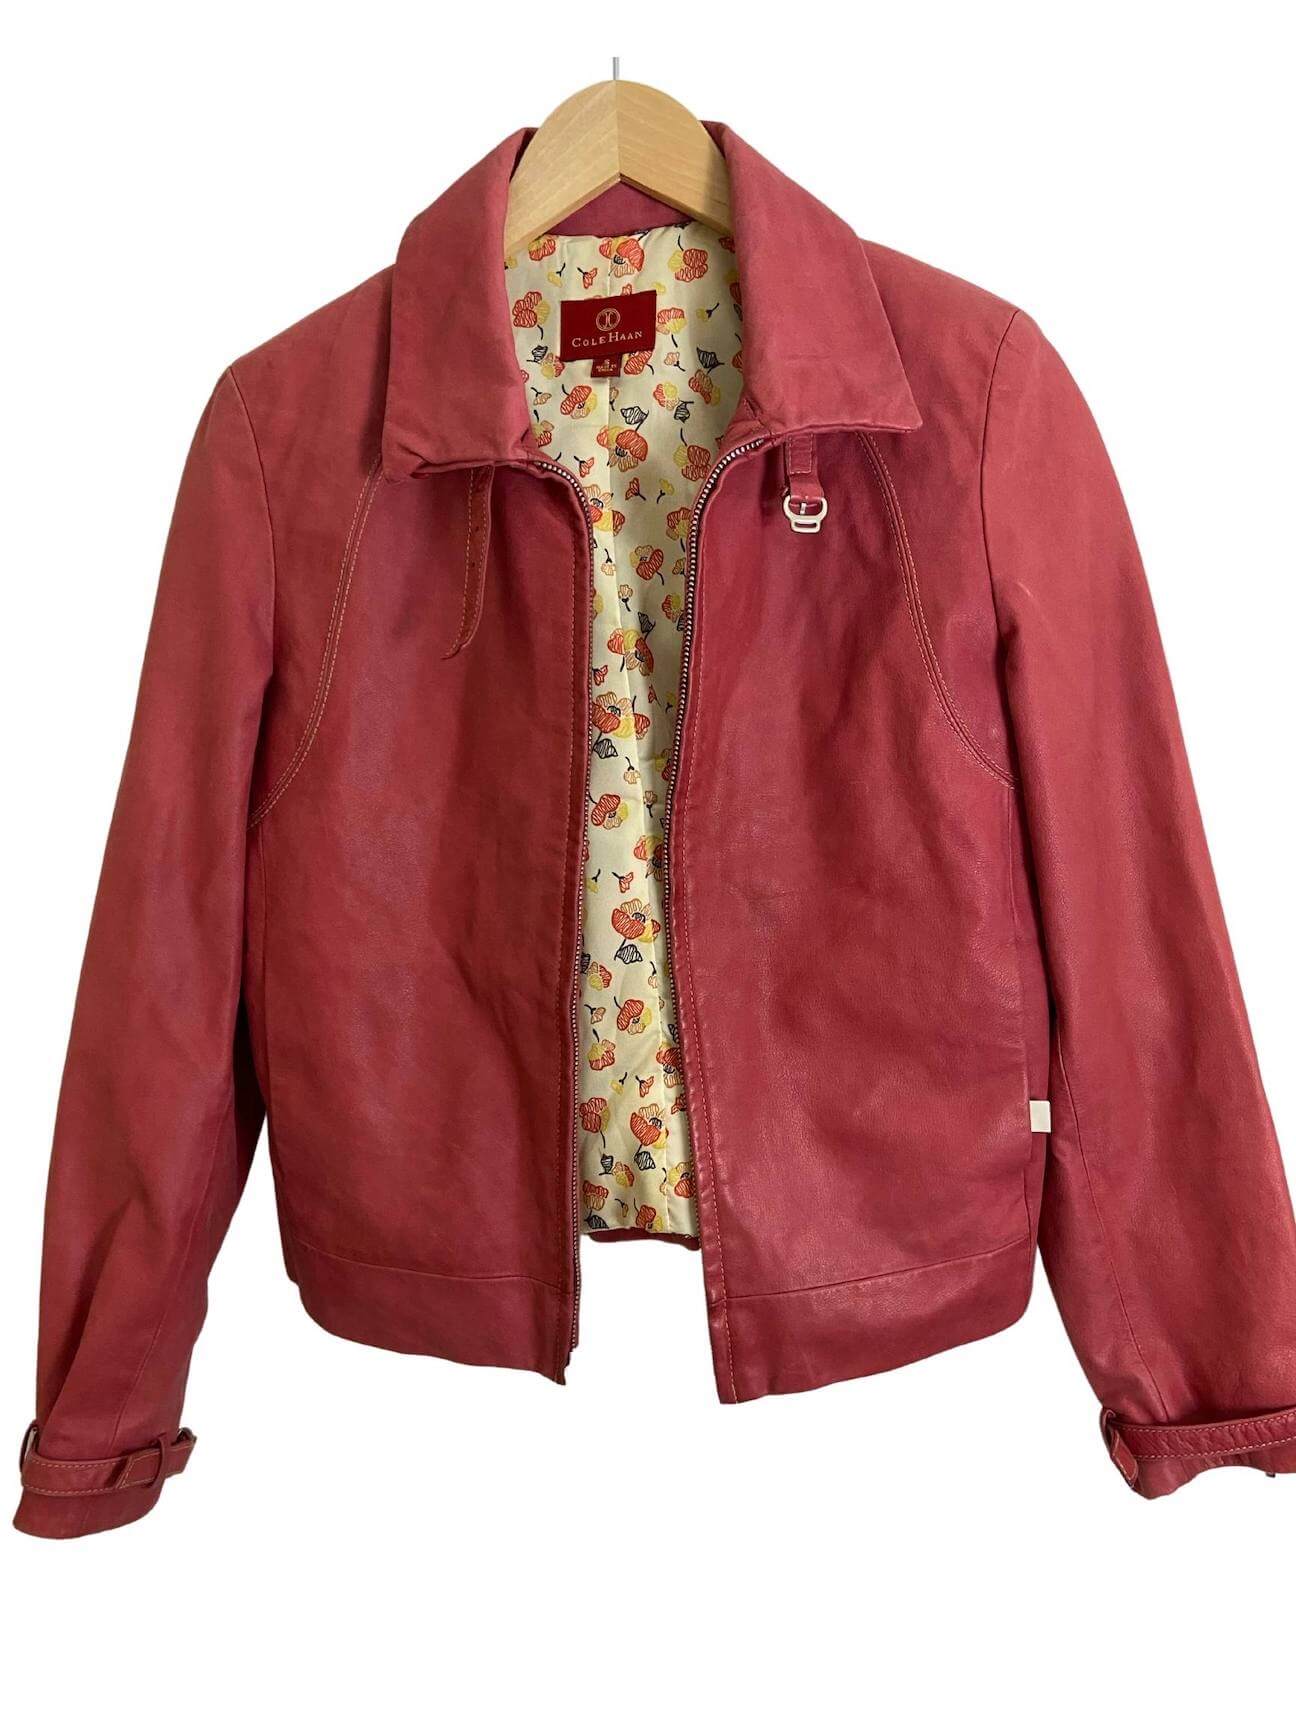 Soft Autumn Cole Haan dusty rose leather jacket 